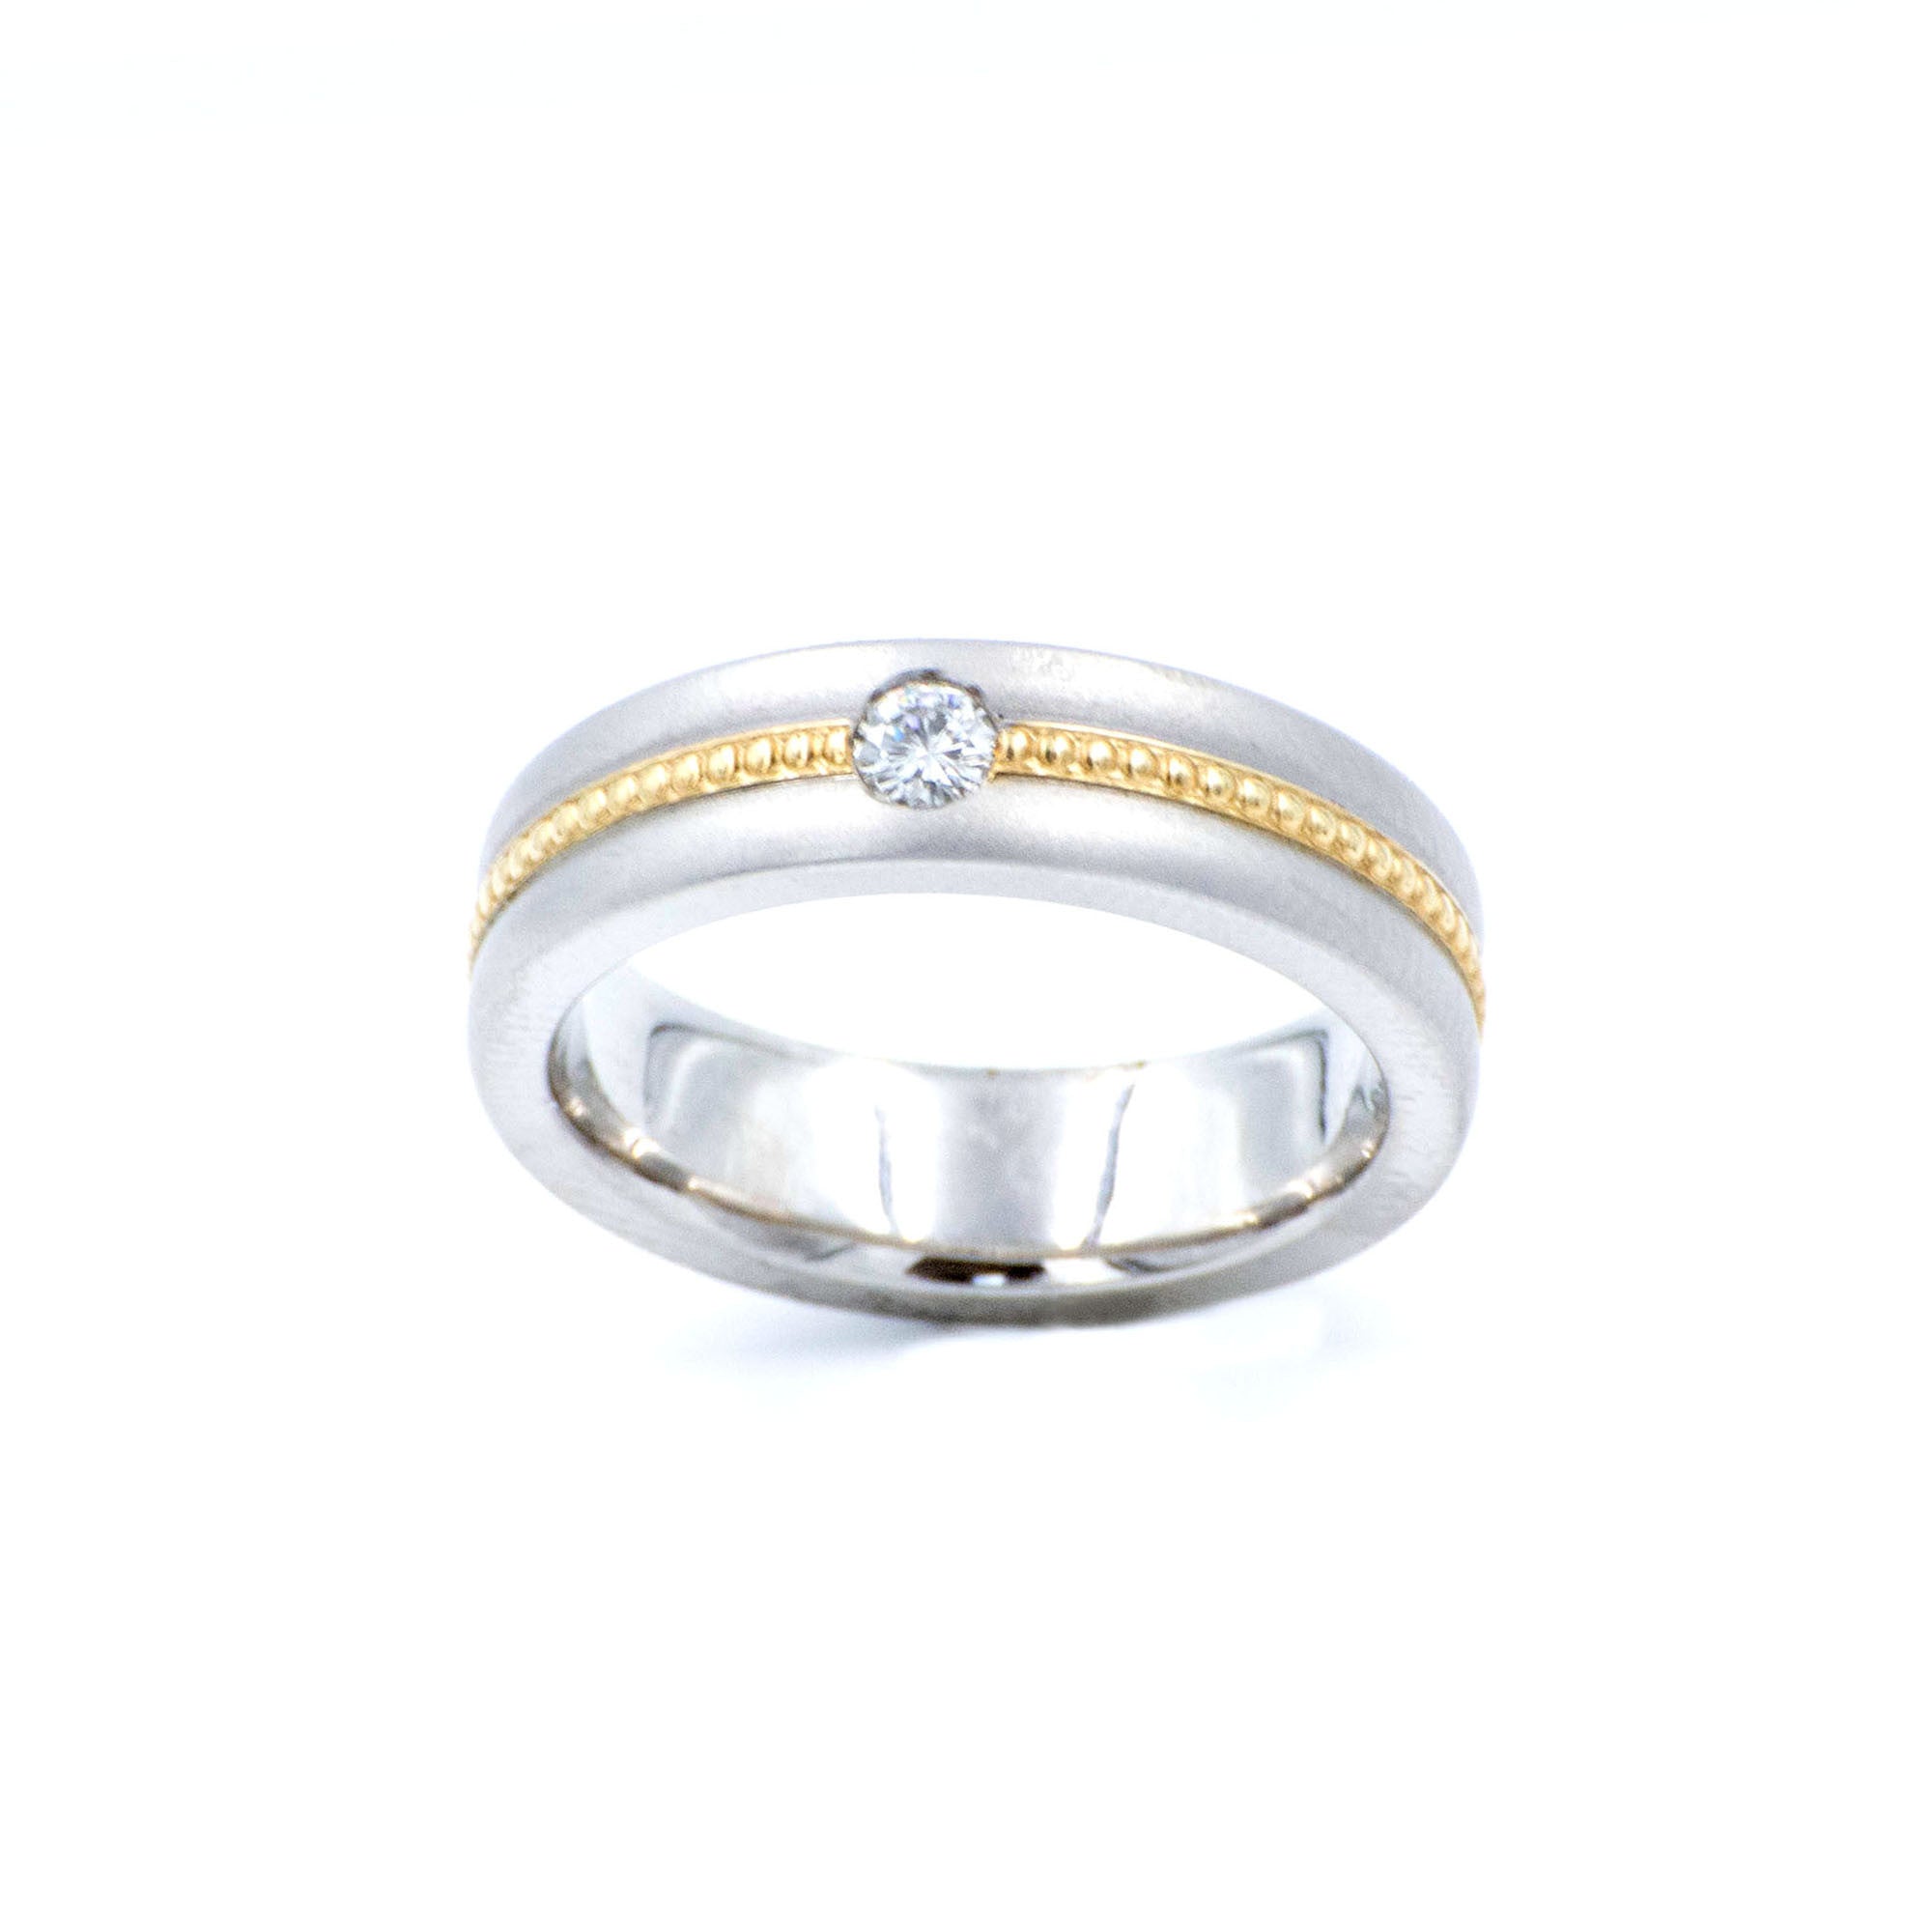 Men's Diamond 14k White and Yellow Gold Wedding Band Eternity Style Rope and Satin Design